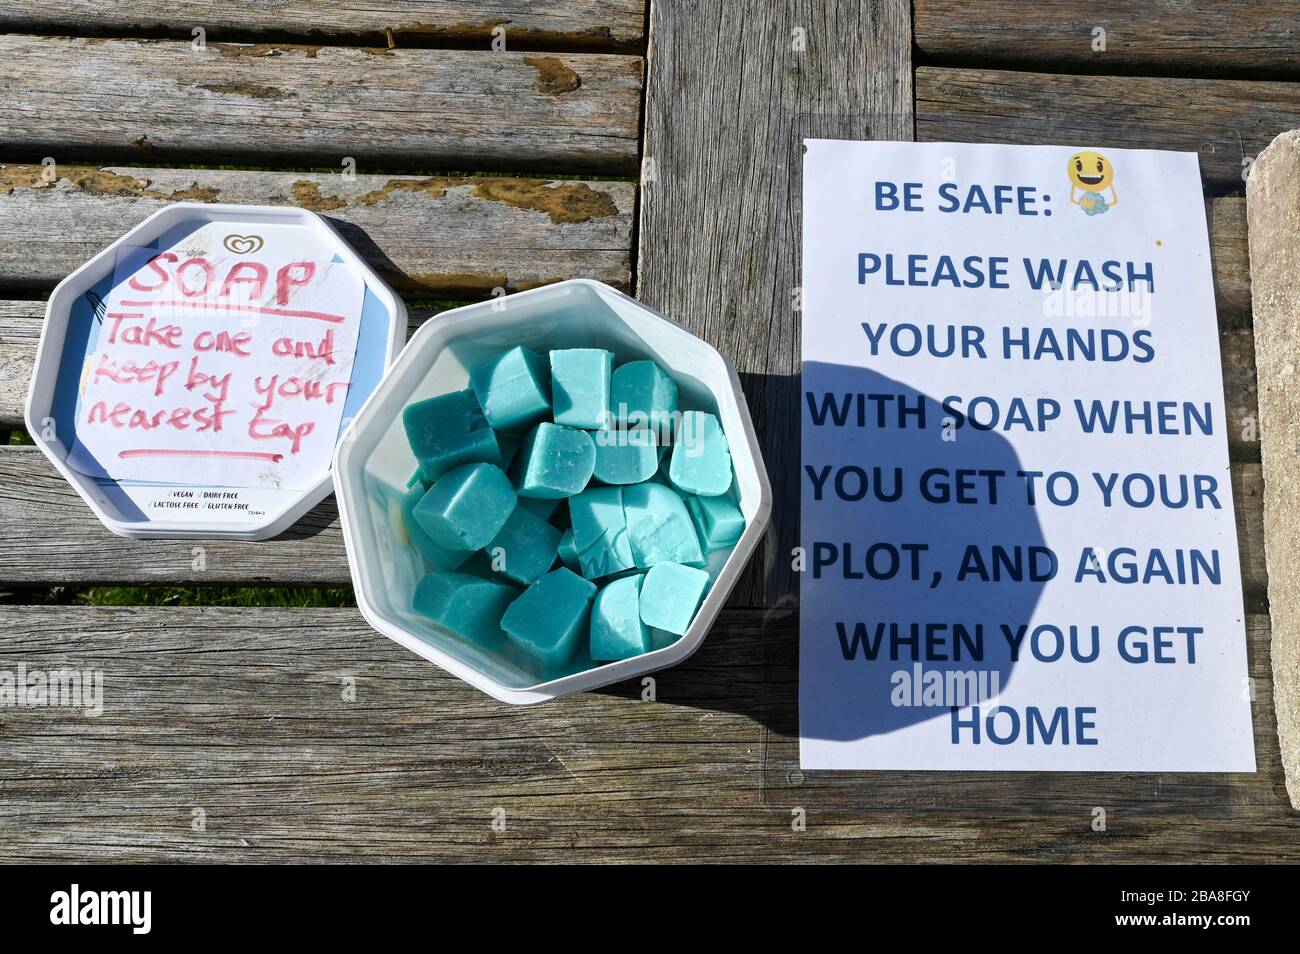 Covid19 hygiene. A container of complimentary soap with instructions to wash hands on an allotment garden during the coronavirus pandemic. Stock Photo